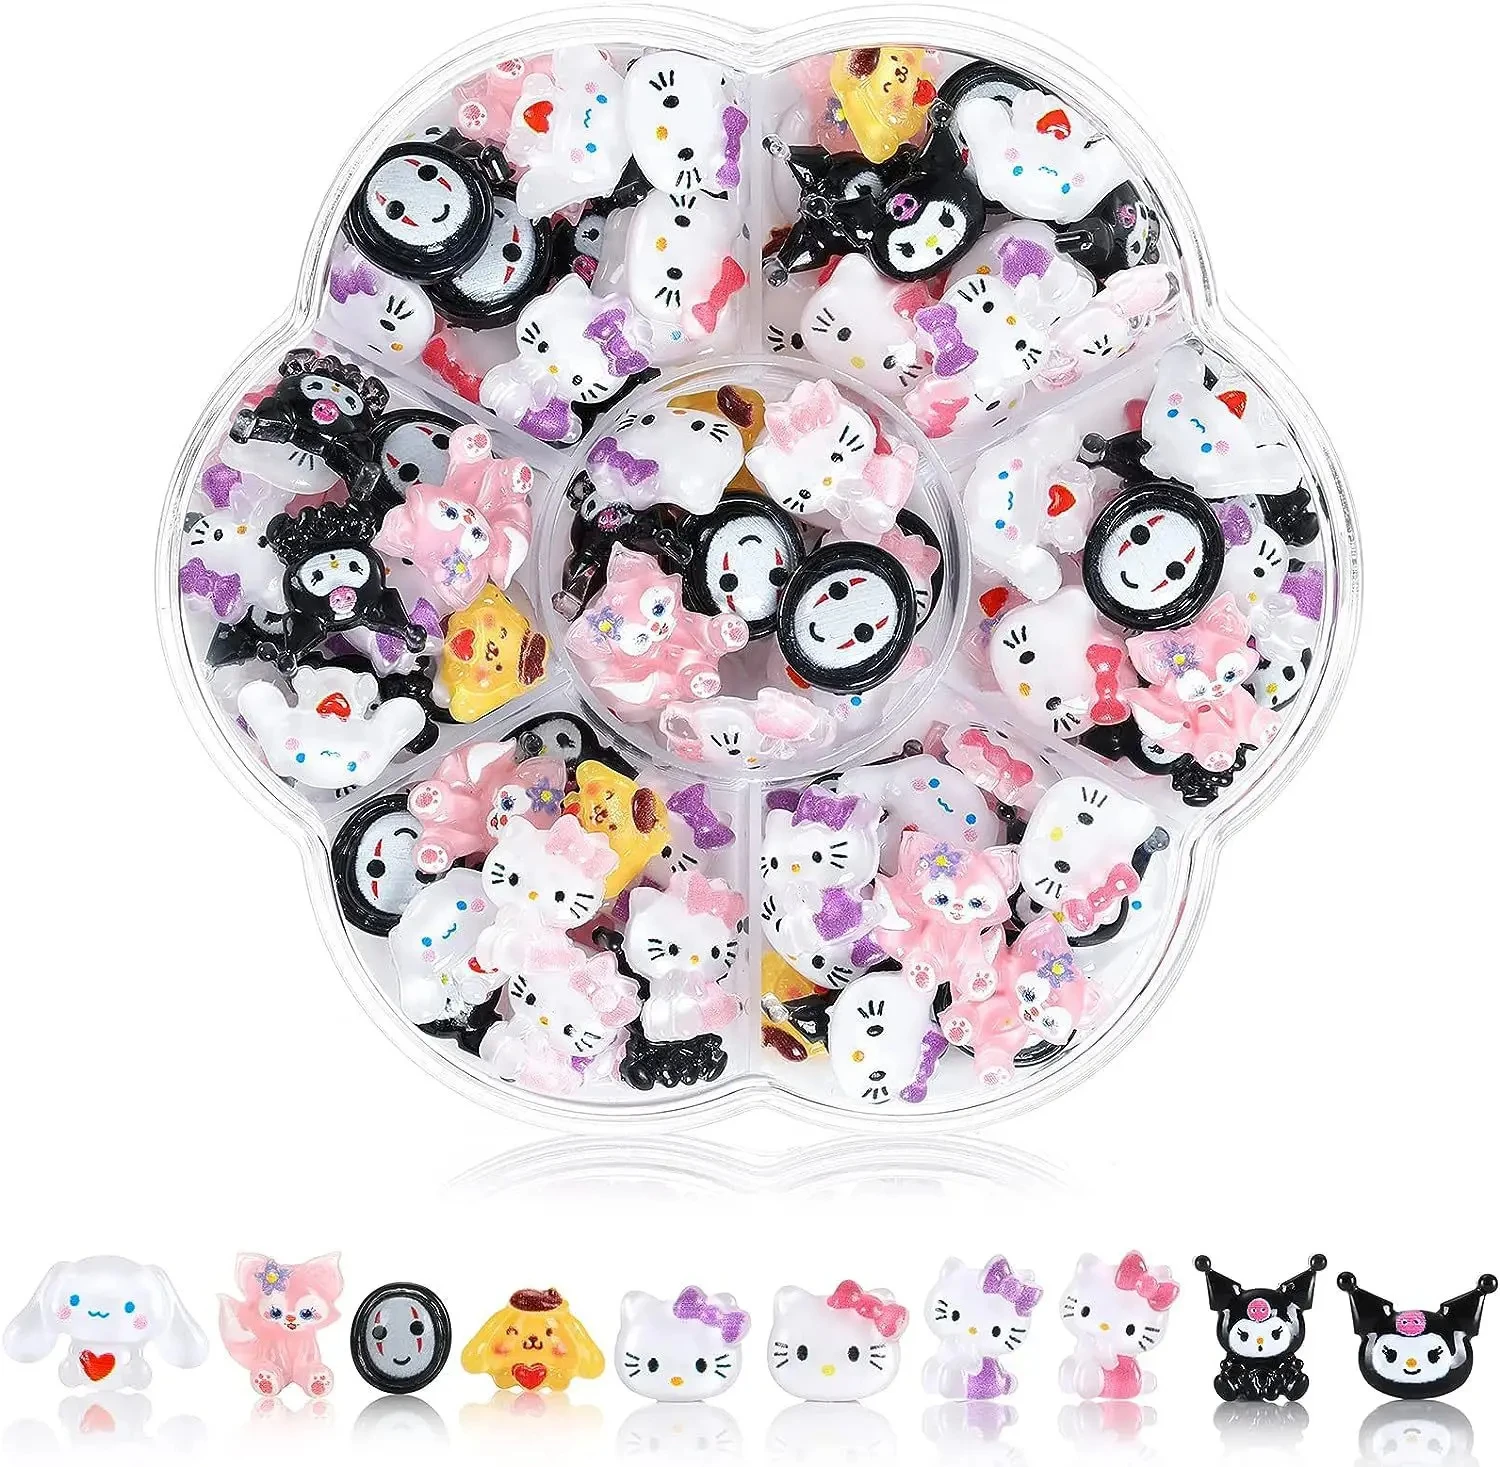 70Pcs/box Sanrio Fake Nail Jewelry Set Cartoon Hello Kitty Cinnamoroll Mymelody Diy Anime Accessories Charms Gems Kit Diy Crafts korean fashion crystal double layer ear clip earrings for women jewelry new zircon ear cuffs without hole snakes fake earrings